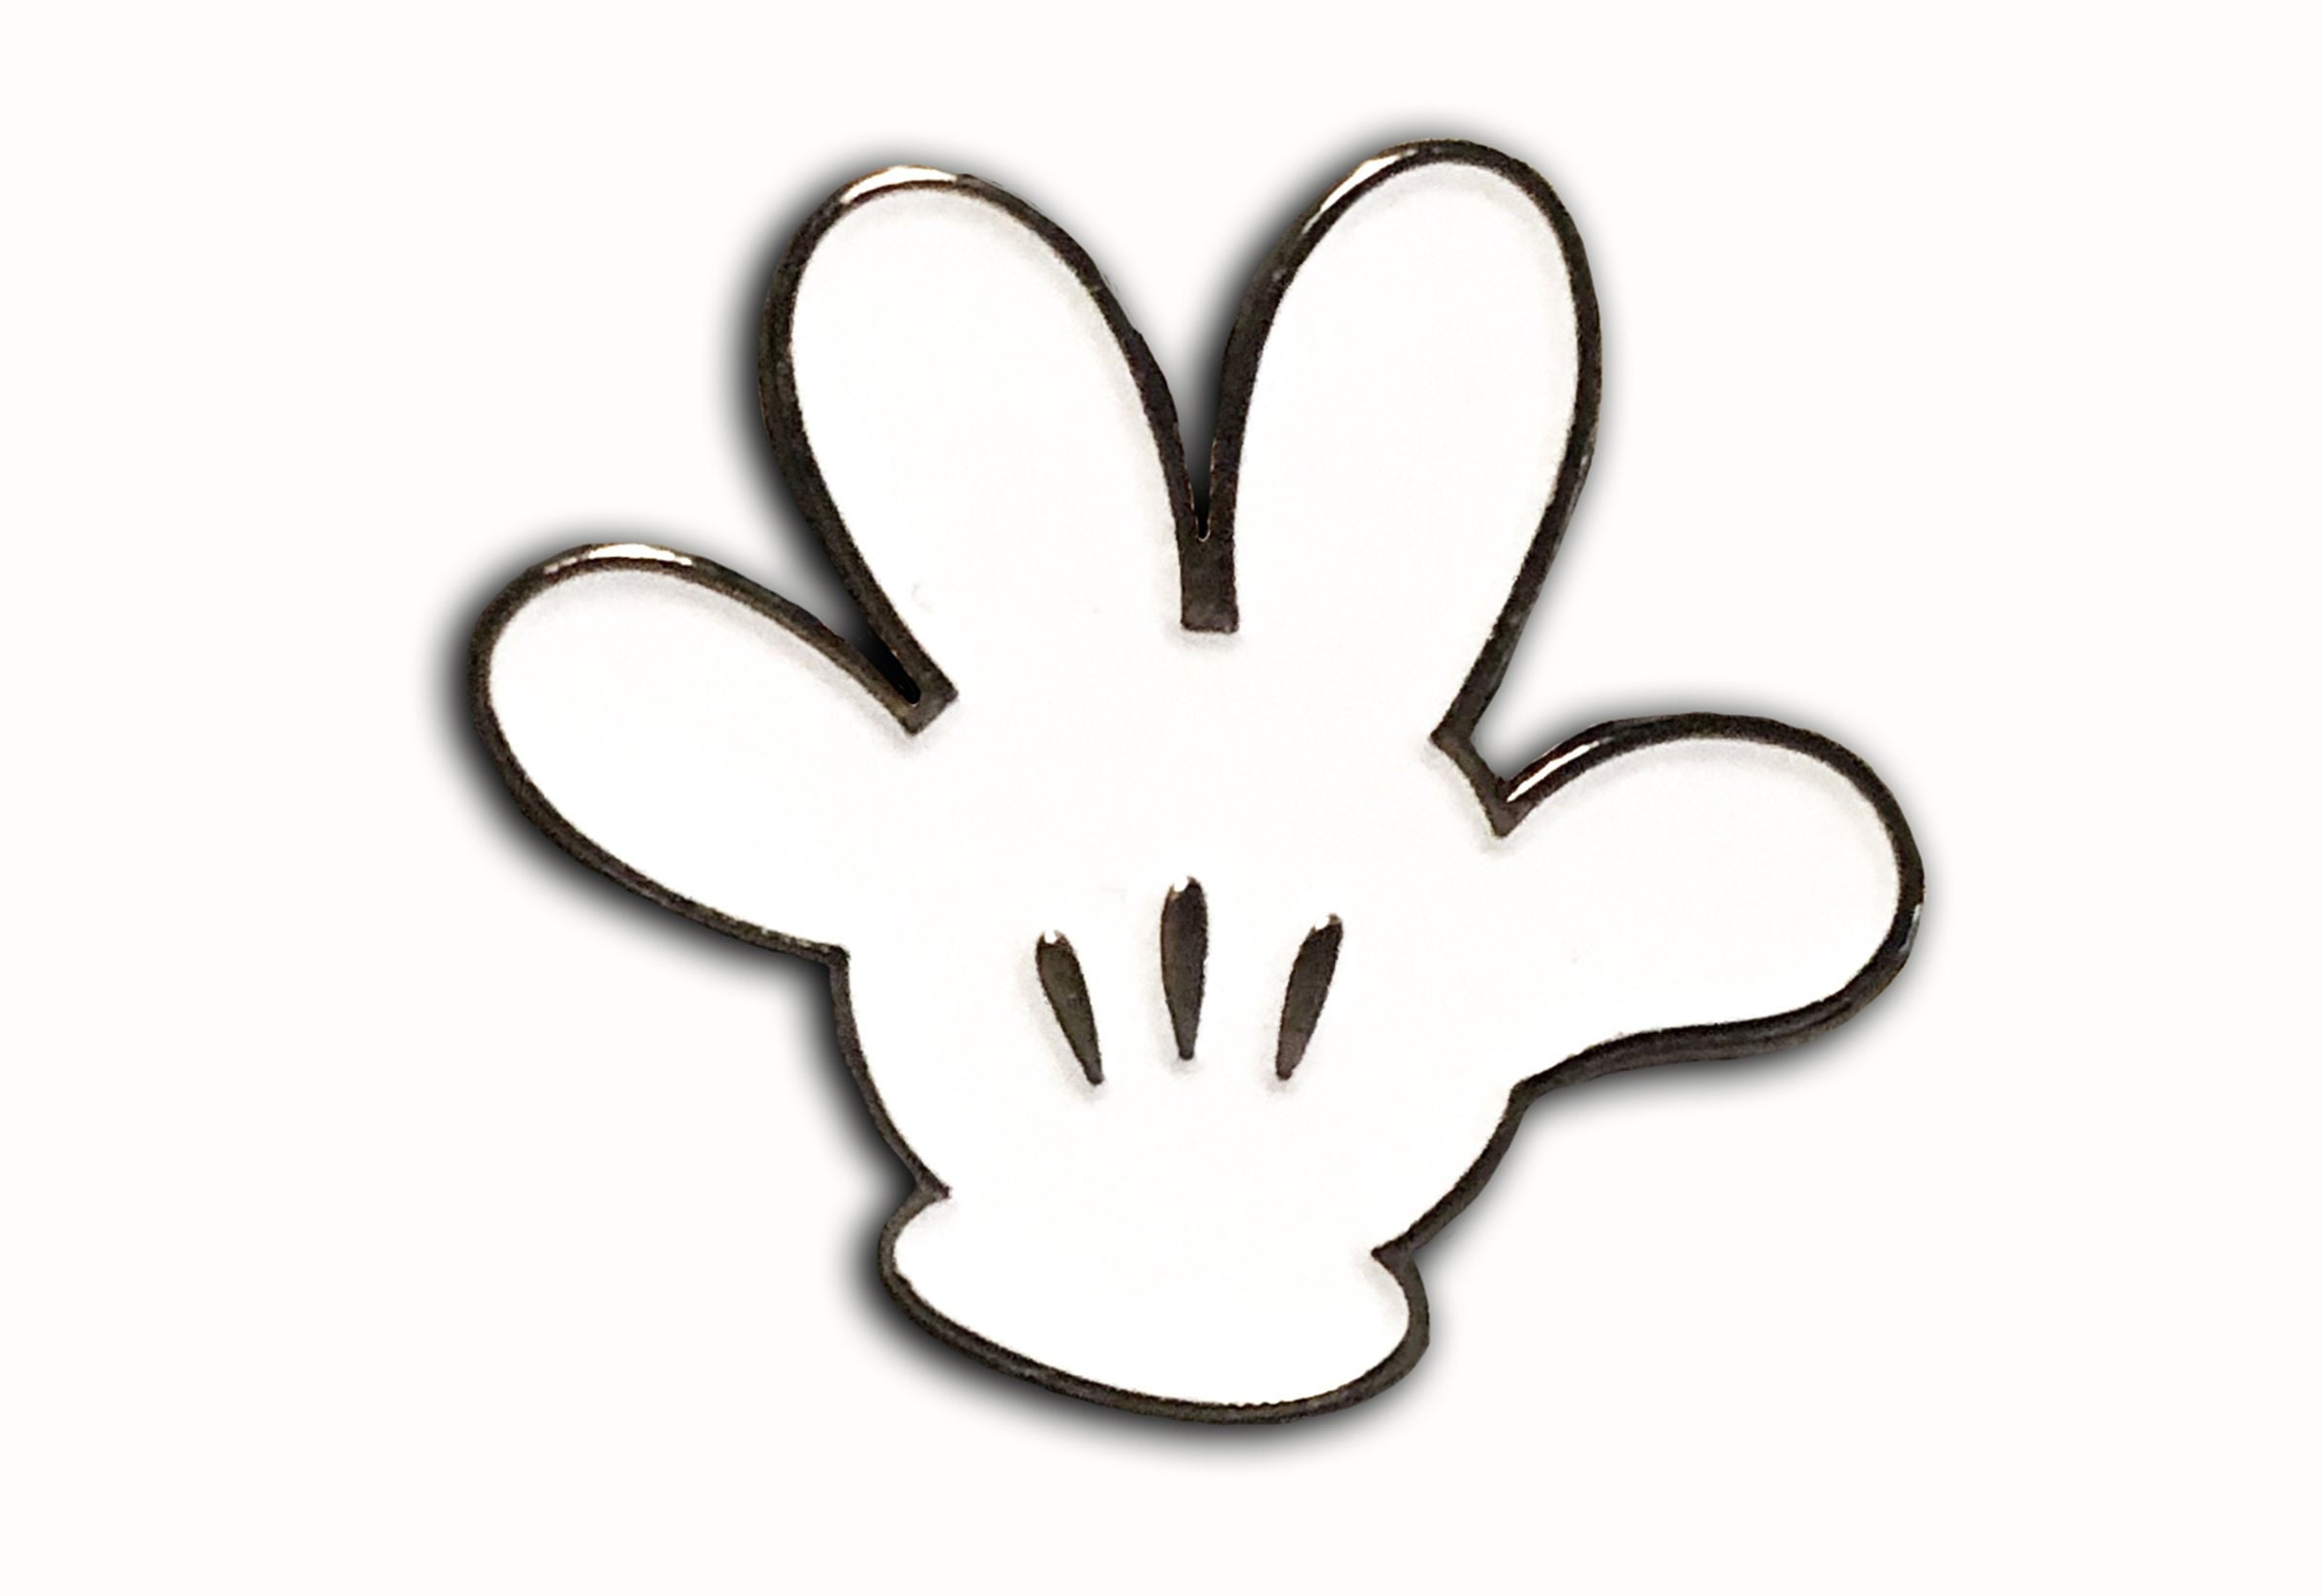 Official Mickey Mouse Glove Peace Sign Embroidered Iron On Patch – Patch  Collection